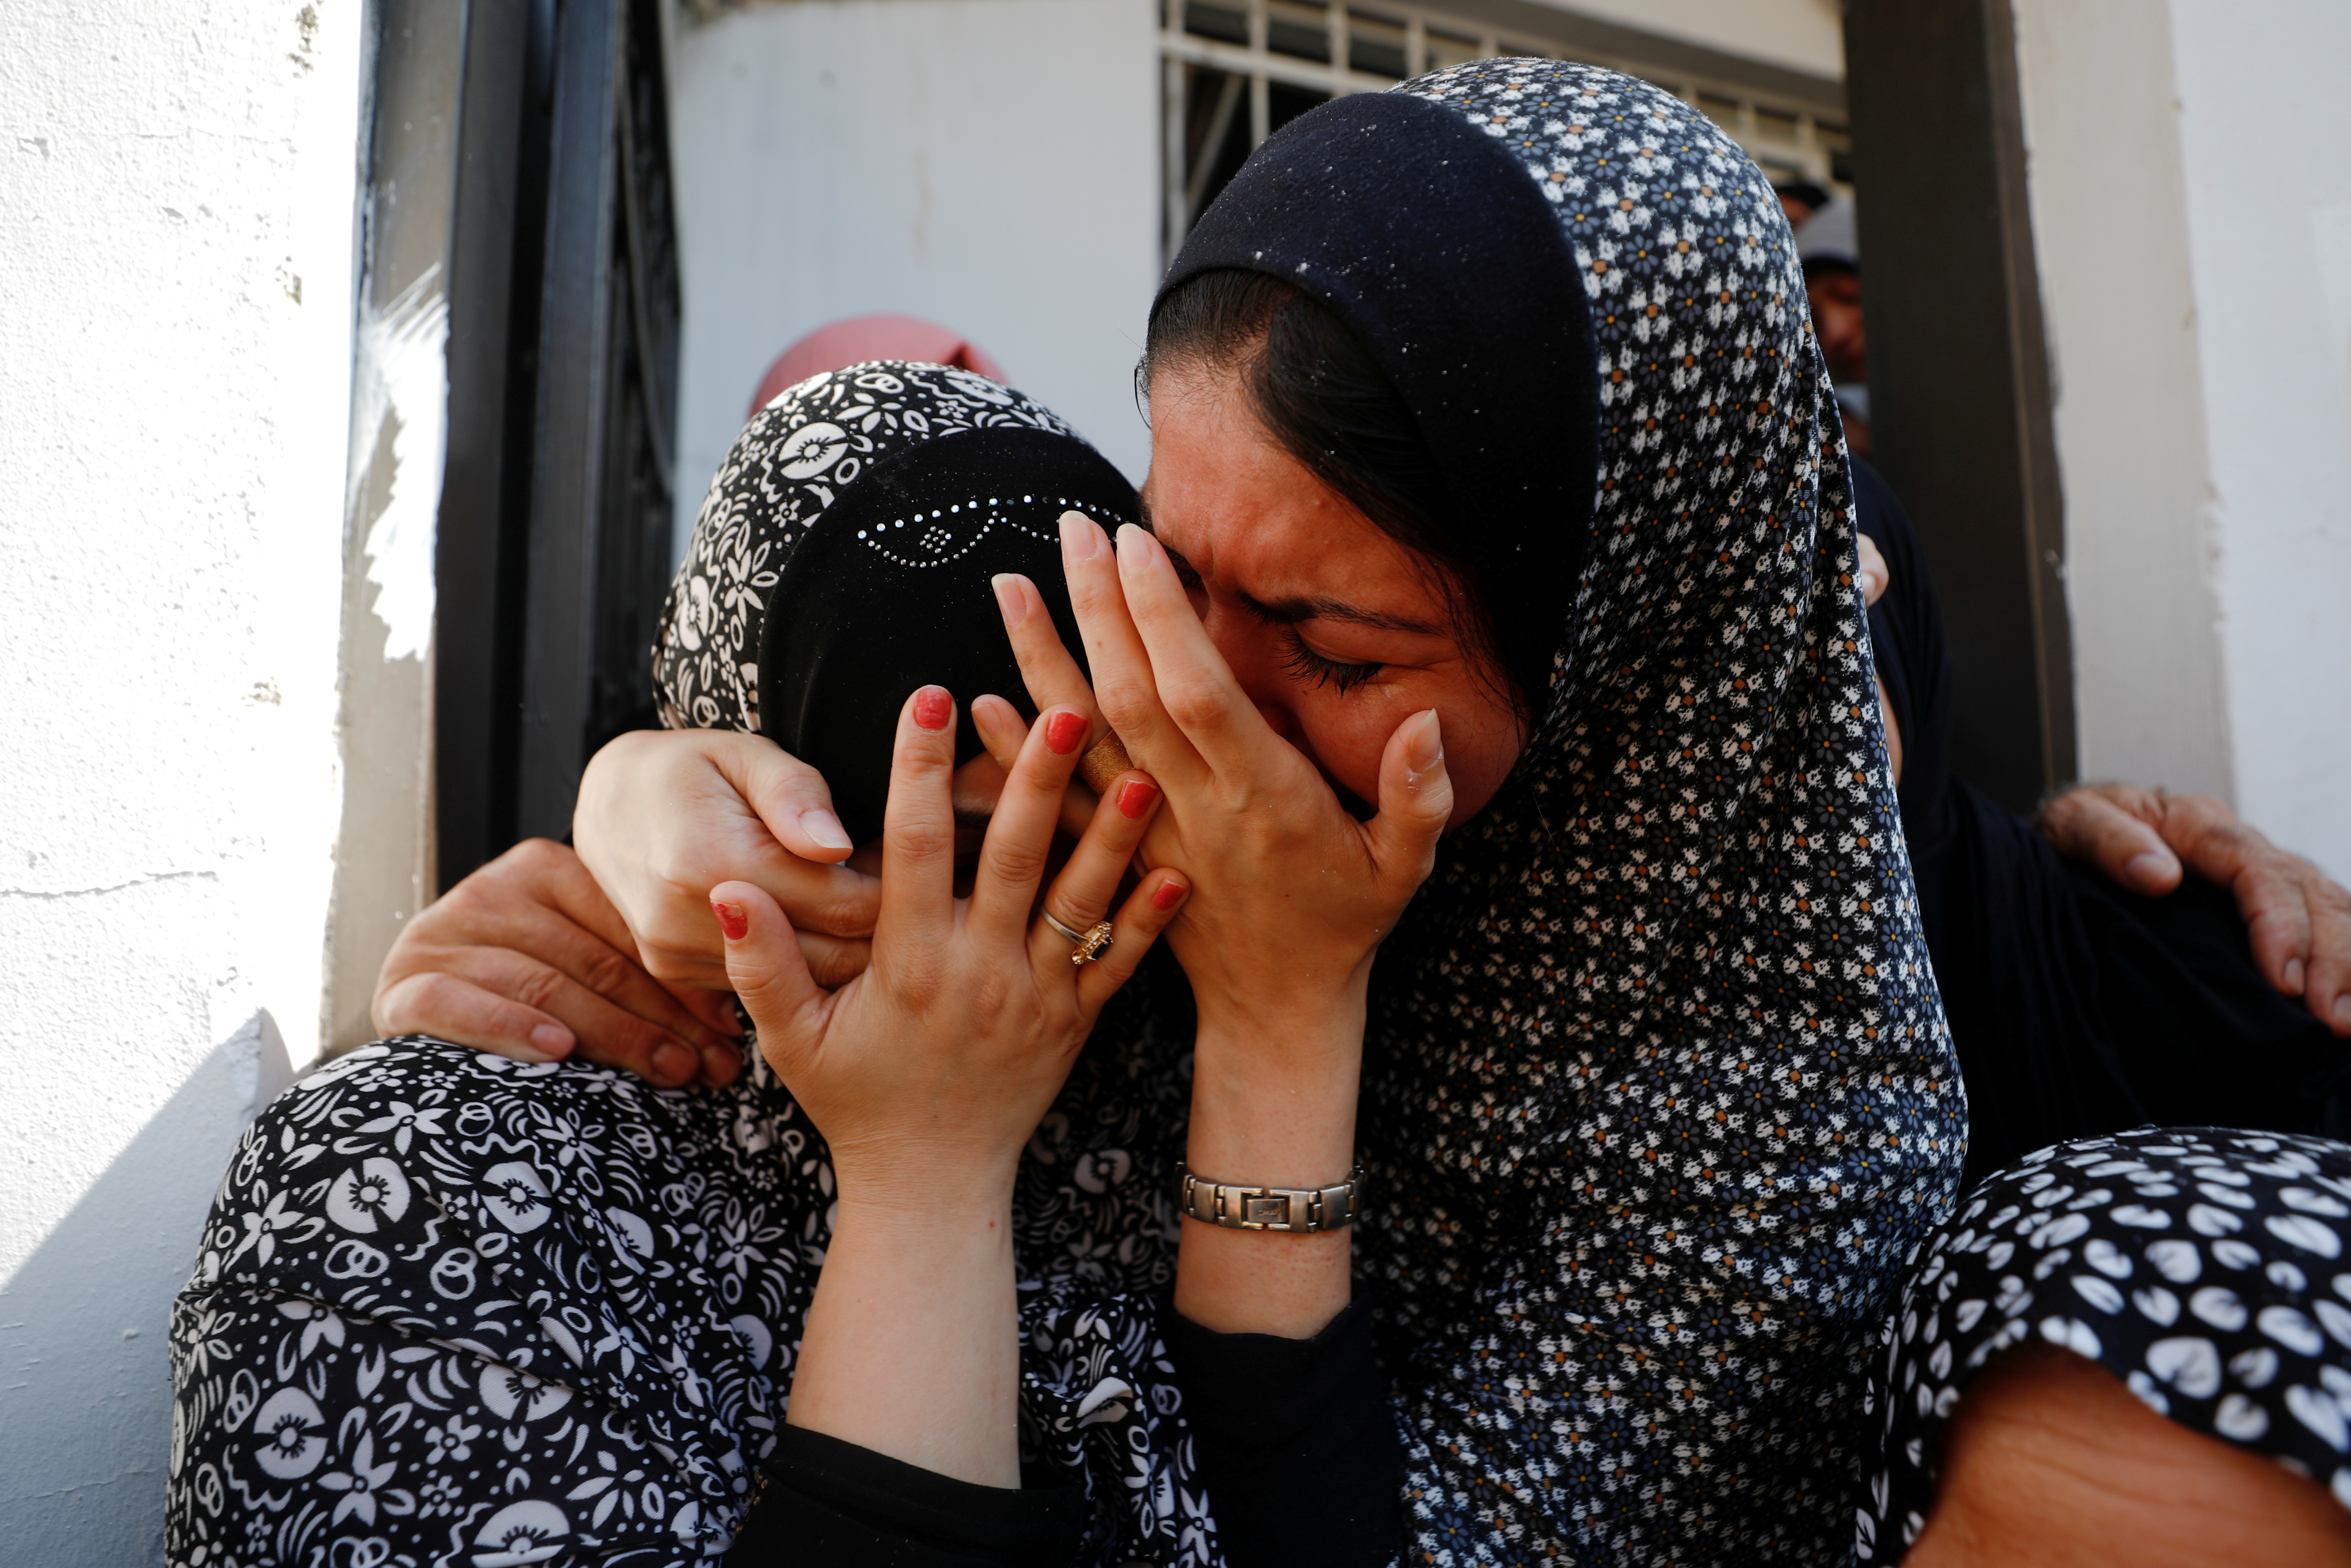 Mourners react during the funeral of Palestinian Saleh Ammar, in Jenin